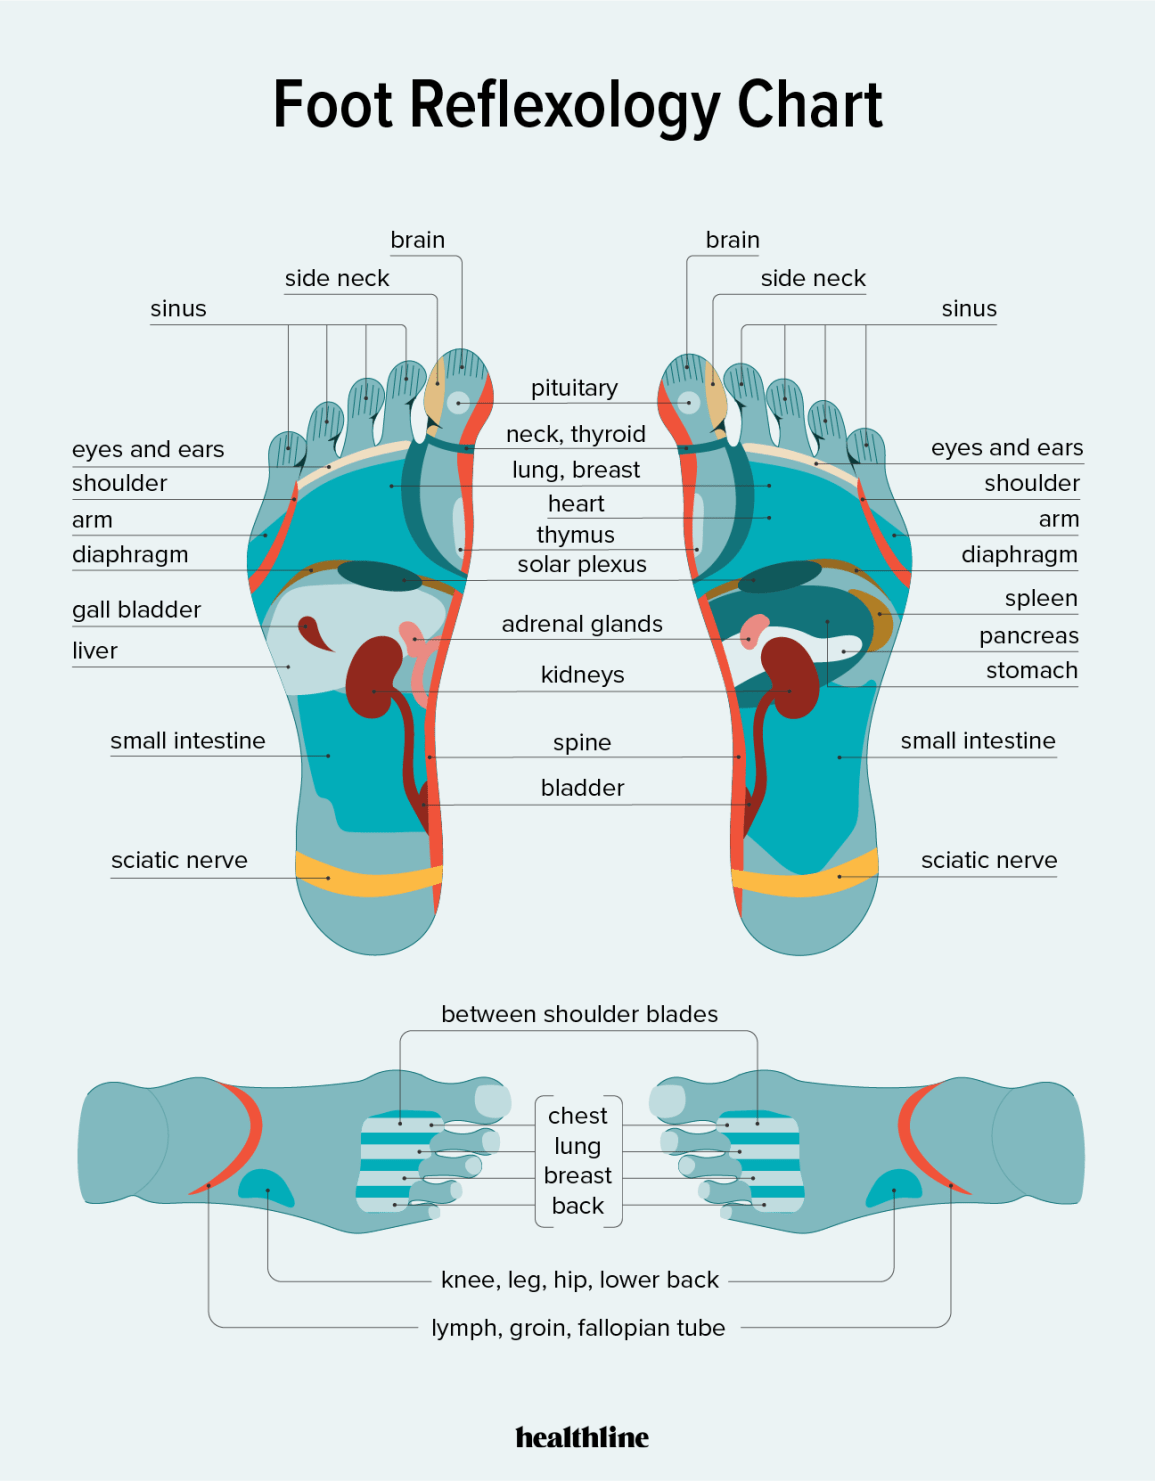 Foot Reflexology Chart: Points, How to, Benefits, and Risks